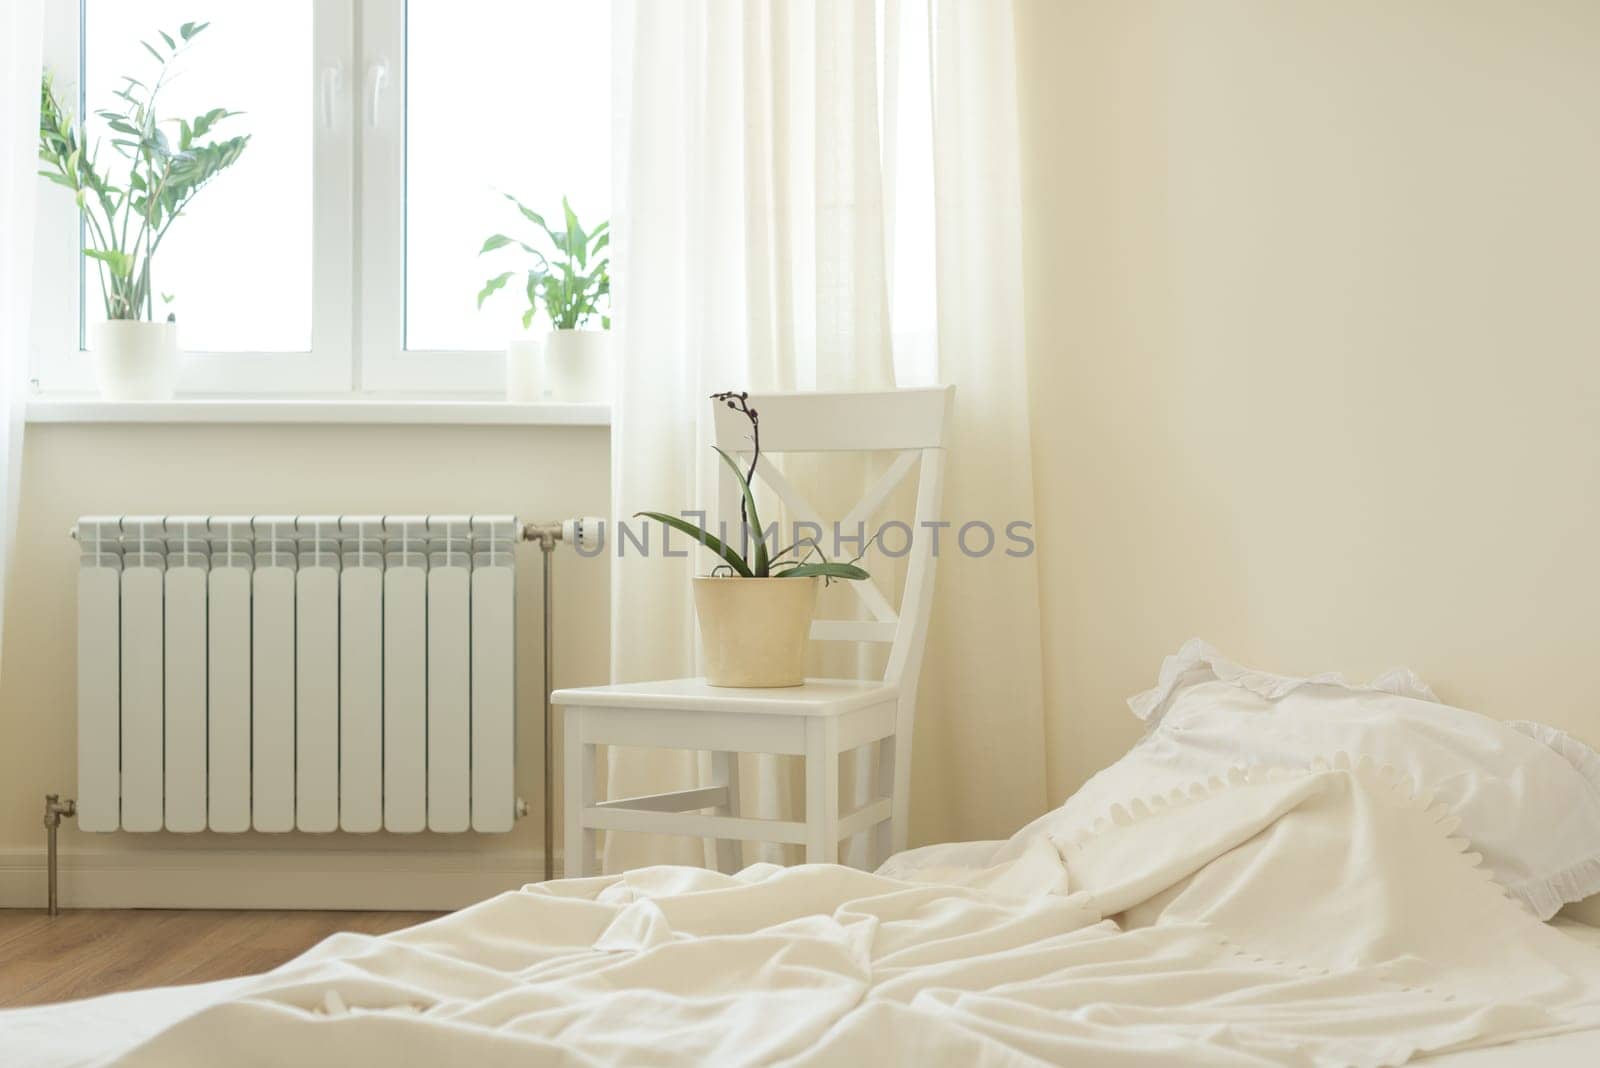 Light pastel bedroom interior, bed, white chair, window light curtains